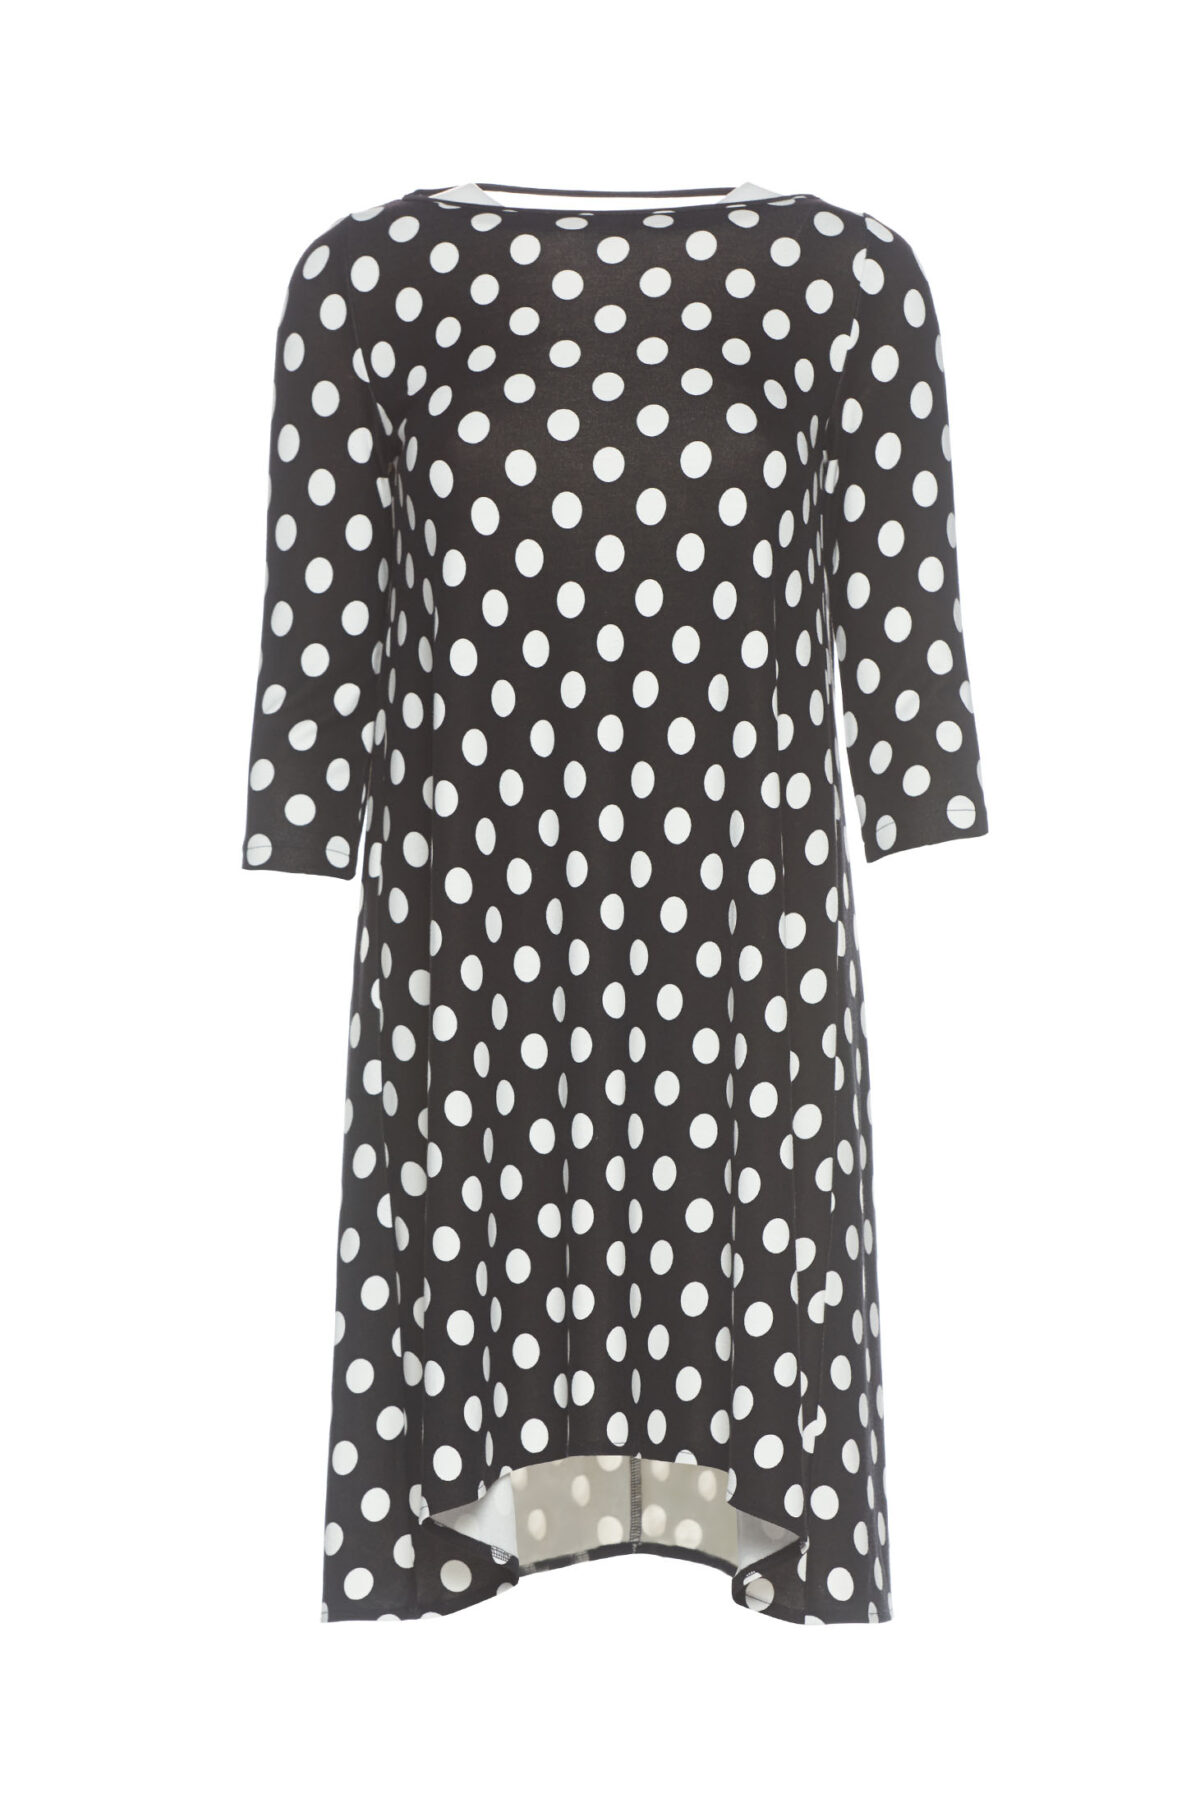 Easy cut black dress with dots print